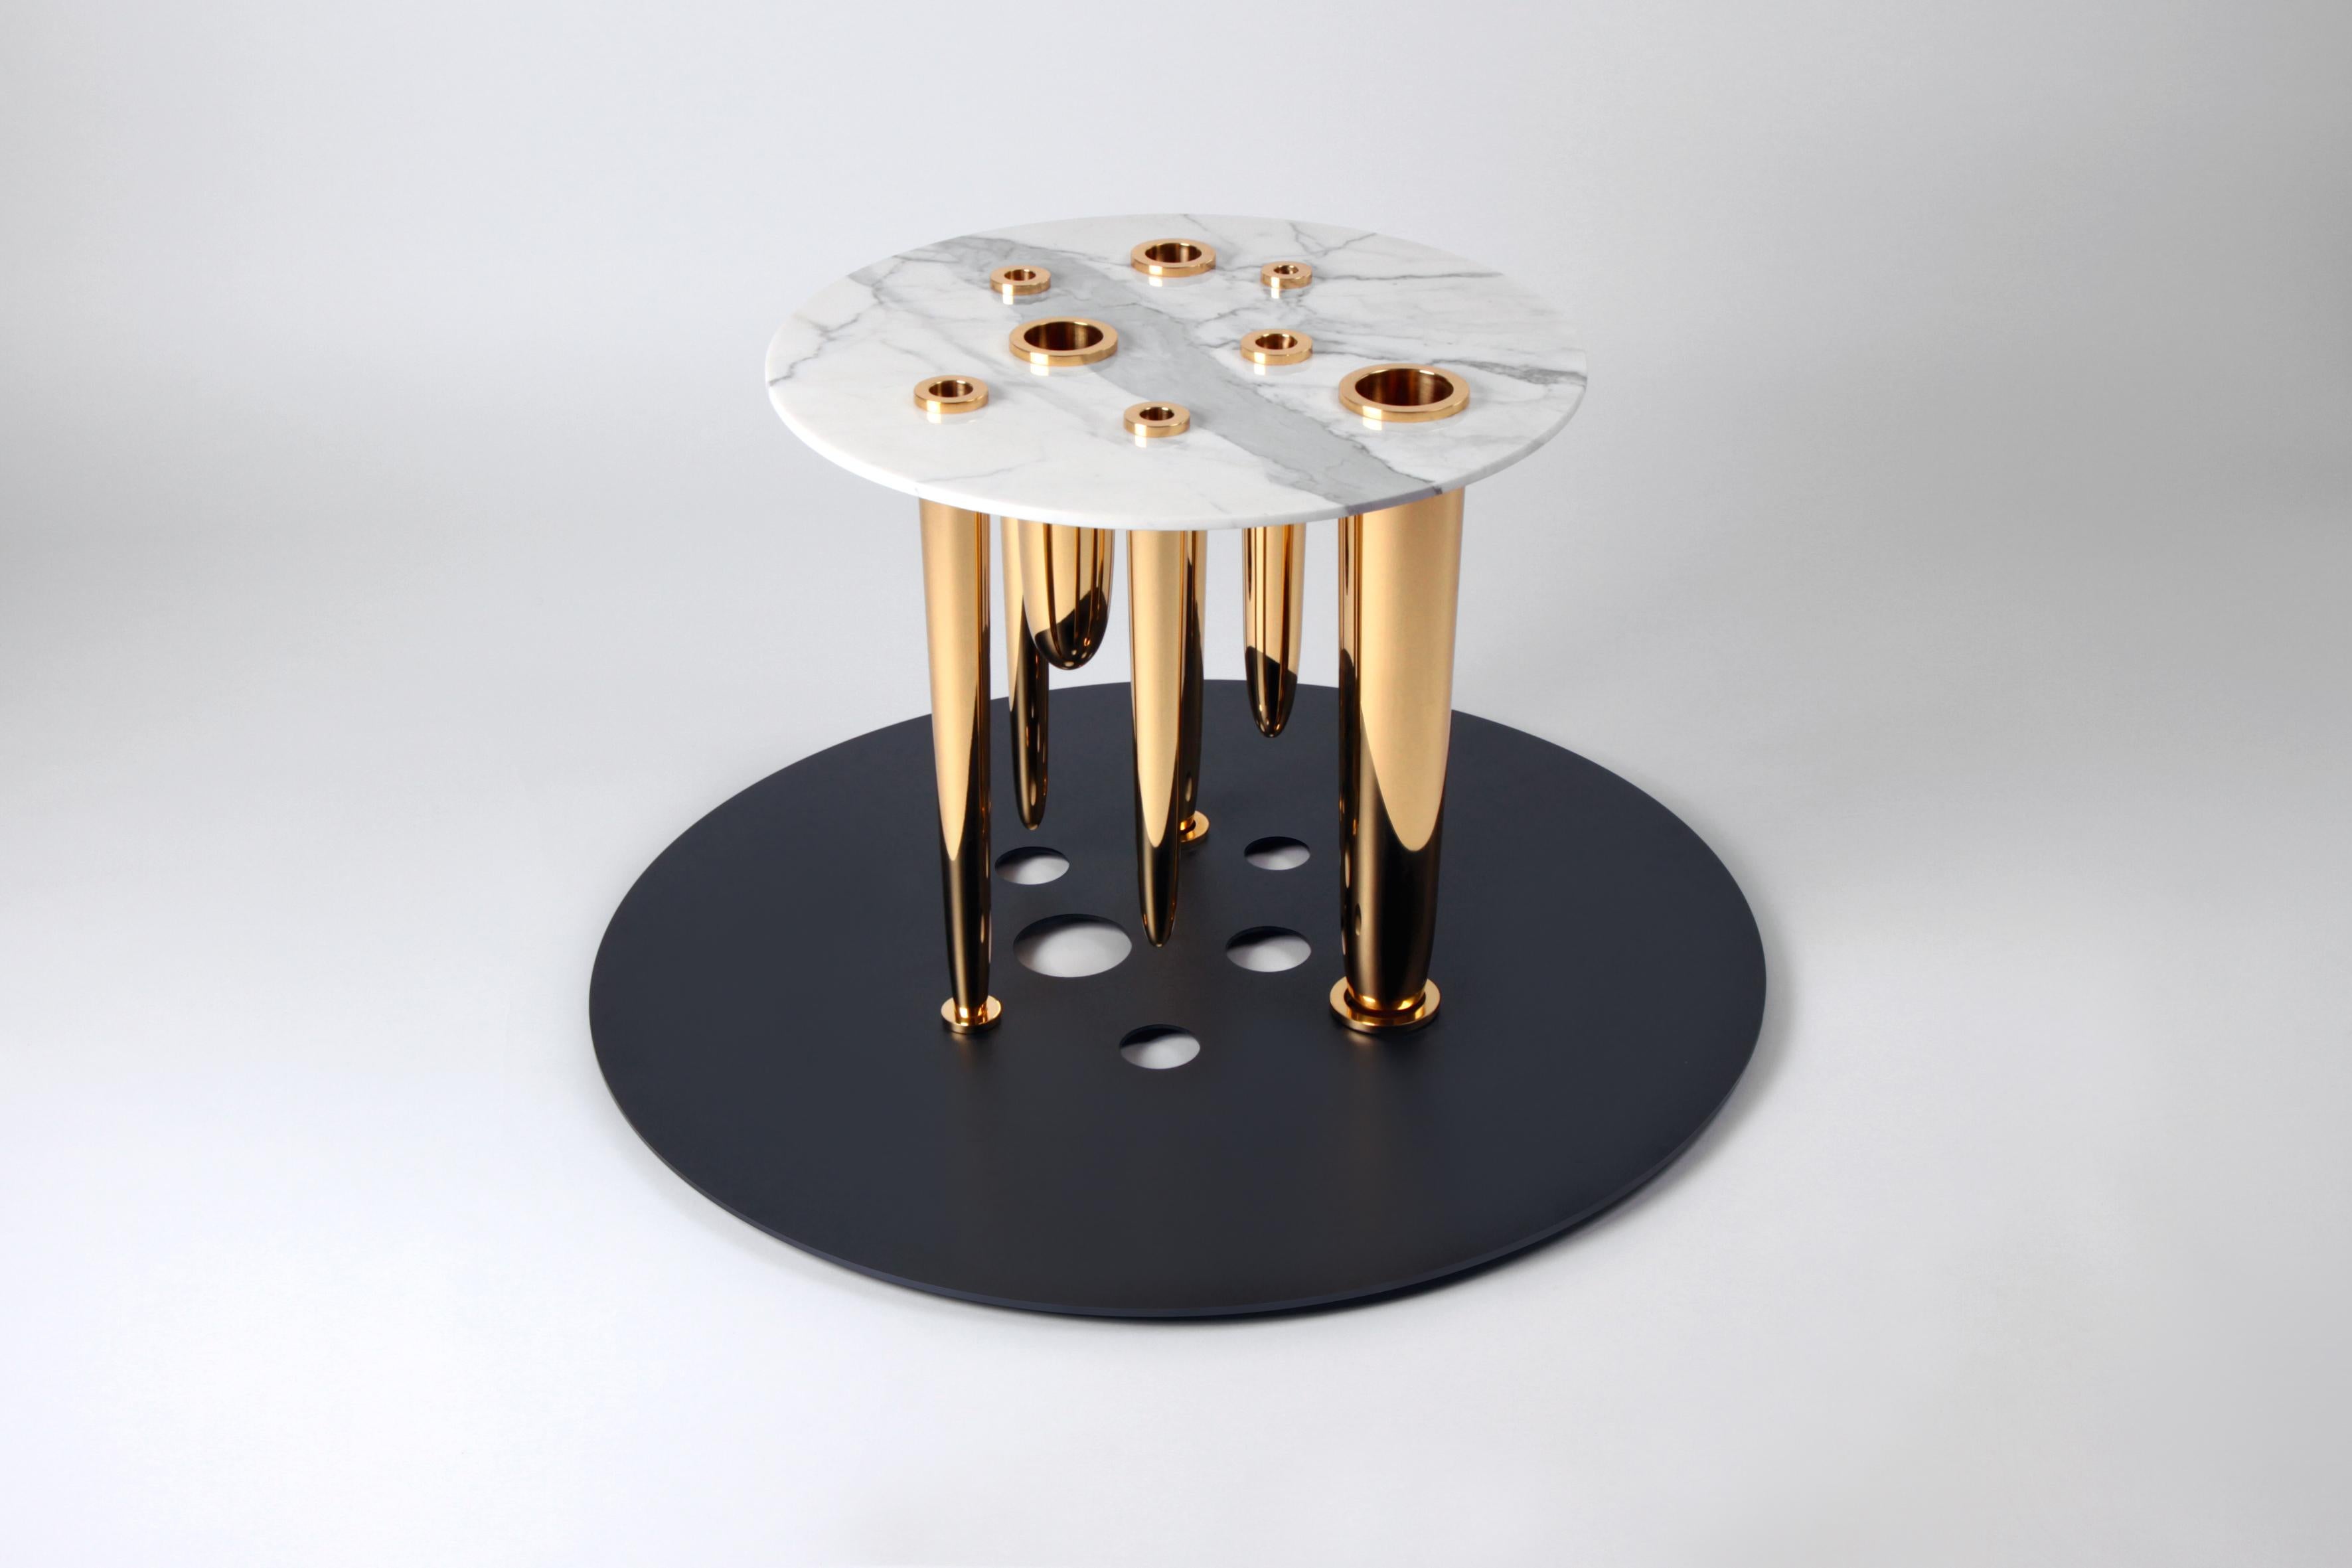 Glory holes side table by Richard Yasmine
Materials: Statuario marble, polished brass and powder coated metal
Dimensions: Diameter 70 x 45 height cm.

For him and her talking about “revenge”, sometimes it can be sweet so “sweet” ….therefore my